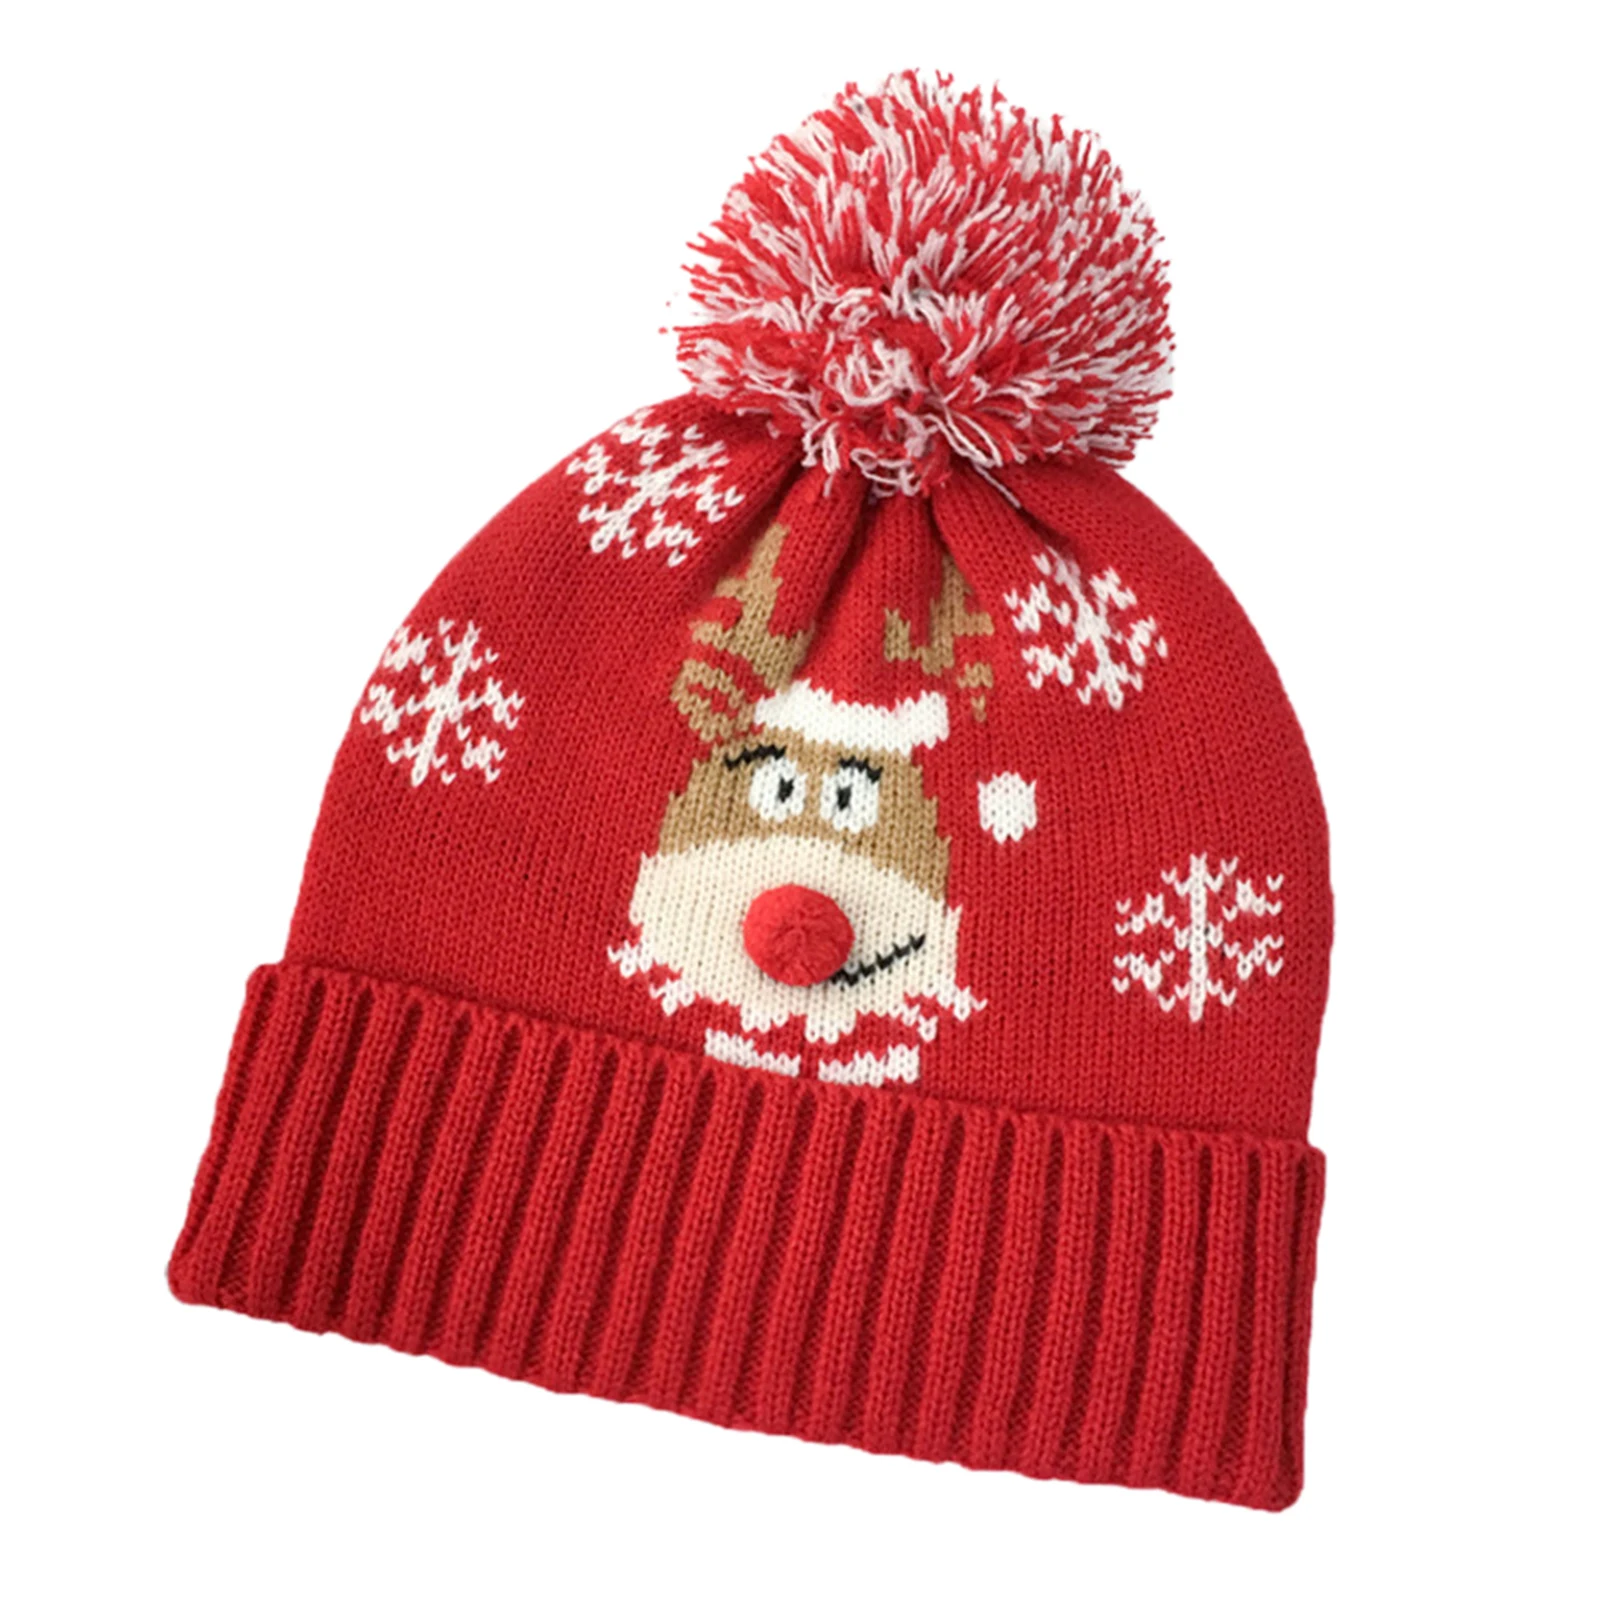 

Unisex Christmas Beanie Hat Winter Knitted Crochet Cap With Cartoon Elk Pattern Rib Cuff Pom Hat For All Ages